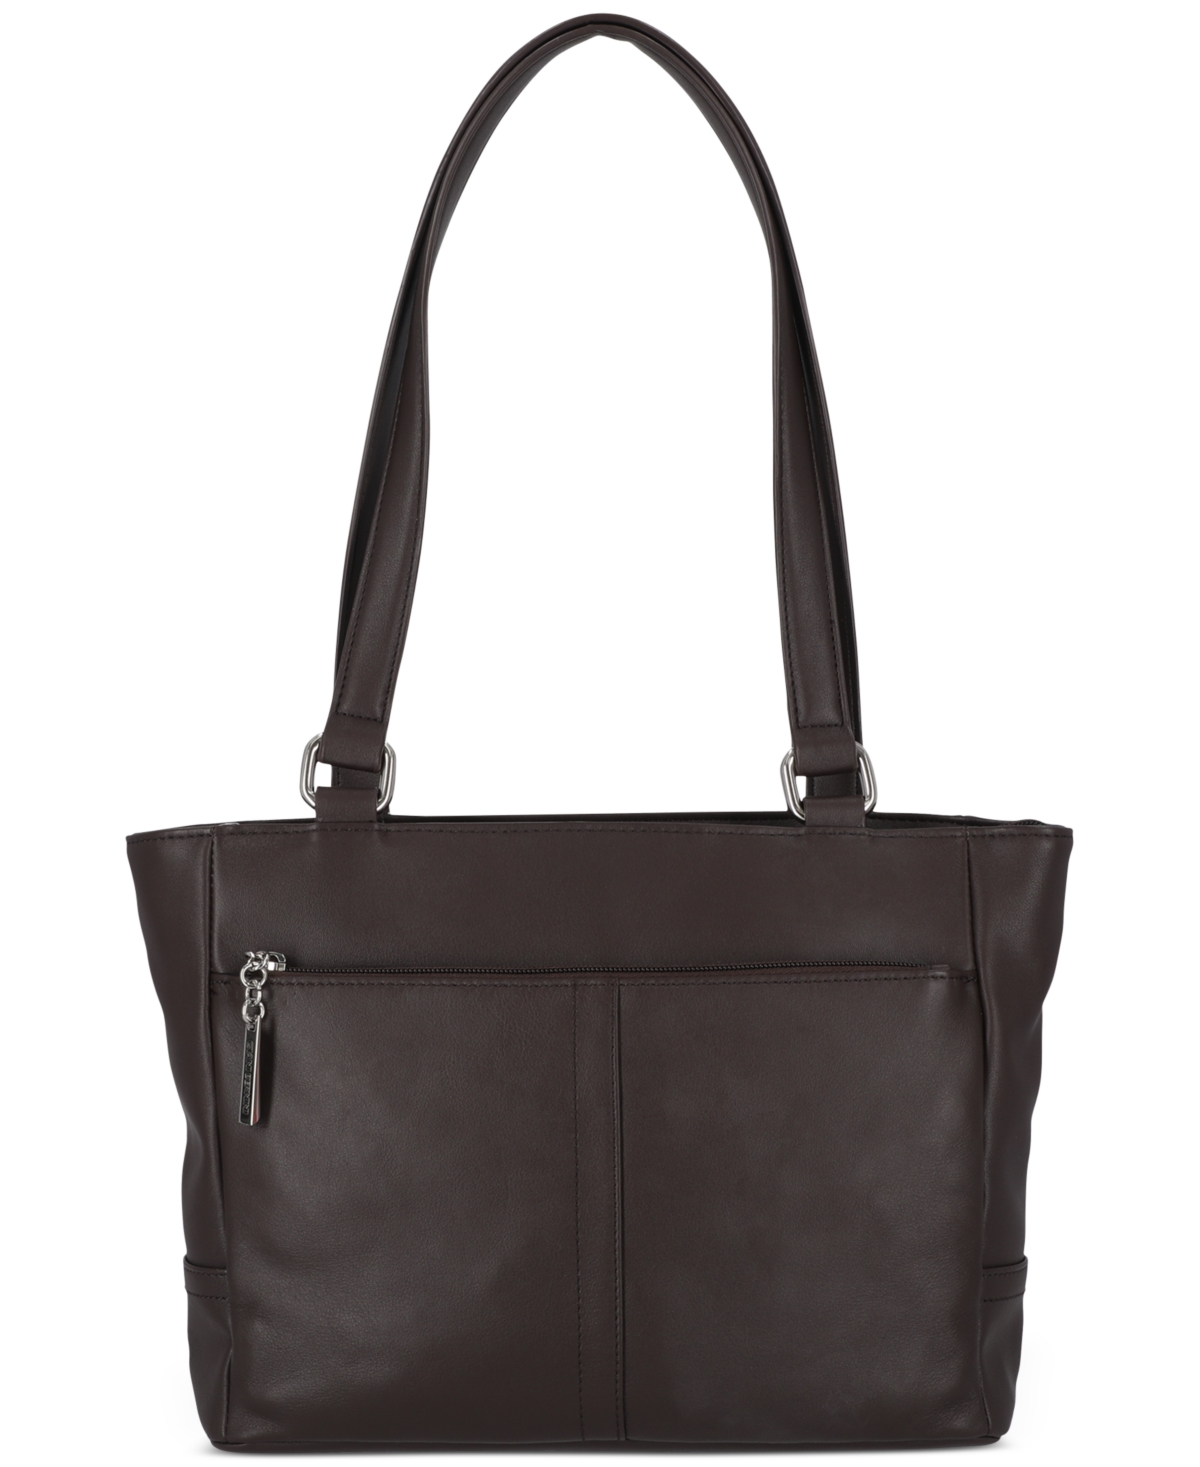 Nappa Classic Leather Tote, Created for Macy's - Chocolate